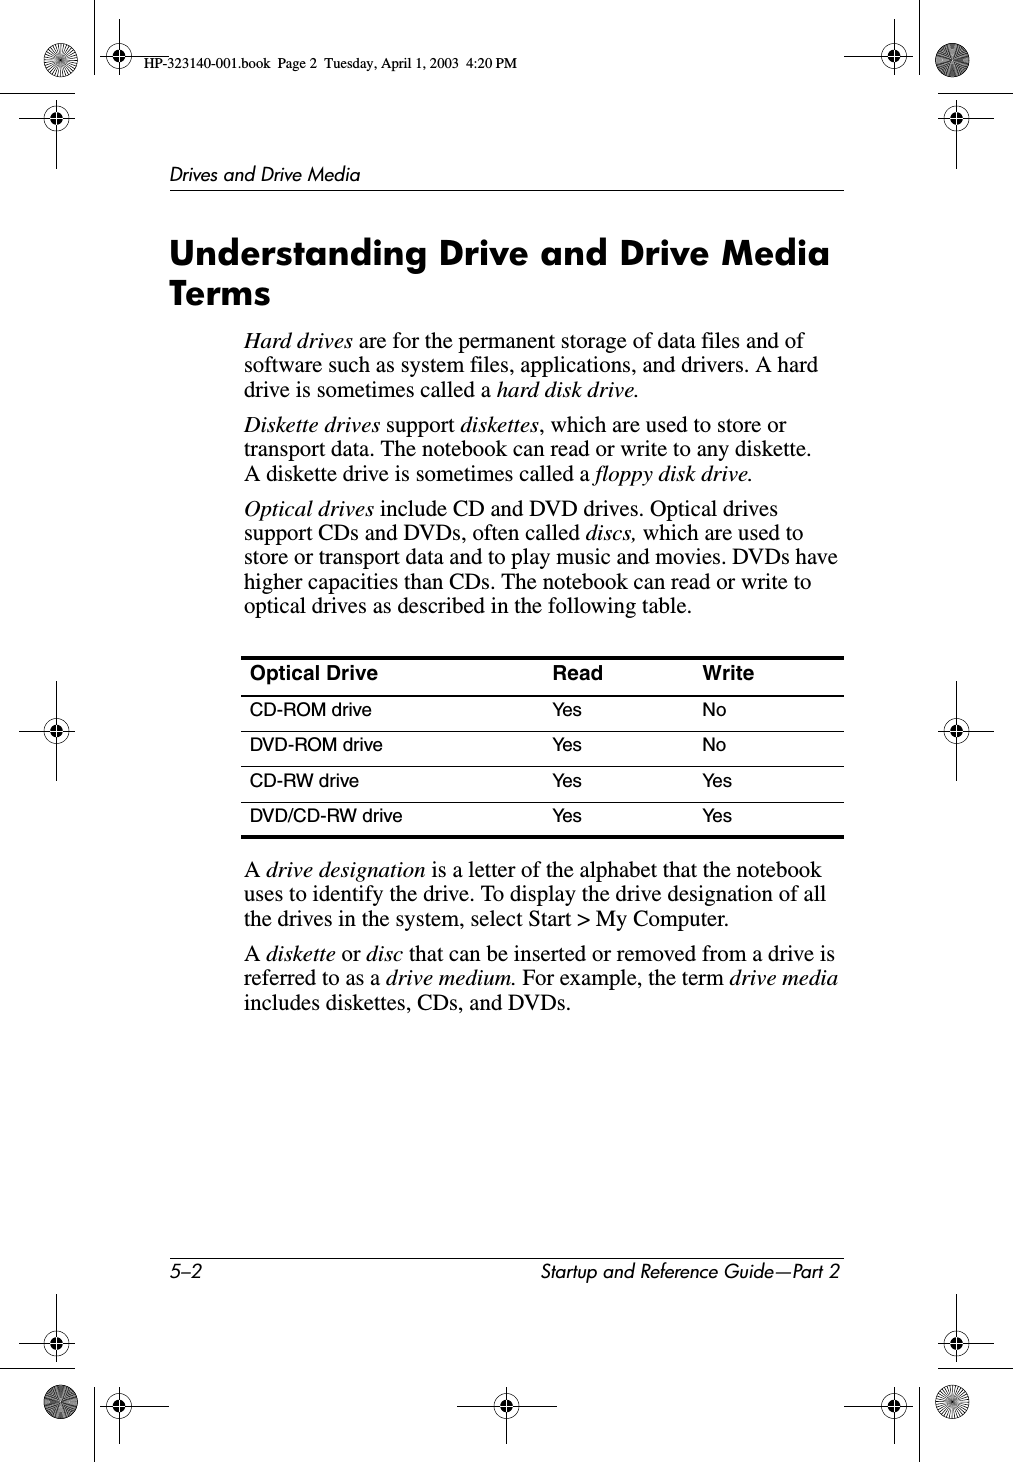 5–2 Startup and Reference Guide—Part 2Drives and Drive MediaUnderstanding Drive and Drive Media TermsHard drives are for the permanent storage of data files and of software such as system files, applications, and drivers. A hard drive is sometimes called a hard disk drive.Diskette drives support diskettes, which are used to store or transport data. The notebook can read or write to any diskette. A diskette drive is sometimes called a floppy disk drive.Optical drives include CD and DVD drives. Optical drives support CDs and DVDs, often called discs, which are used to store or transport data and to play music and movies. DVDs have higher capacities than CDs. The notebook can read or write to optical drives as described in the following table.Adrive designation is a letter of the alphabet that the notebook uses to identify the drive. To display the drive designation of all the drives in the system, select Start &gt; My Computer.Adiskette or disc that can be inserted or removed from a drive is referred to as a drive medium. For example, the term drive mediaincludes diskettes, CDs, and DVDs.Optical Drive Read WriteCD-ROM drive Yes NoDVD-ROM drive Yes No CD-RW drive Yes YesDVD/CD-RW drive Yes YesHP-323140-001.book  Page 2  Tuesday, April 1, 2003  4:20 PM